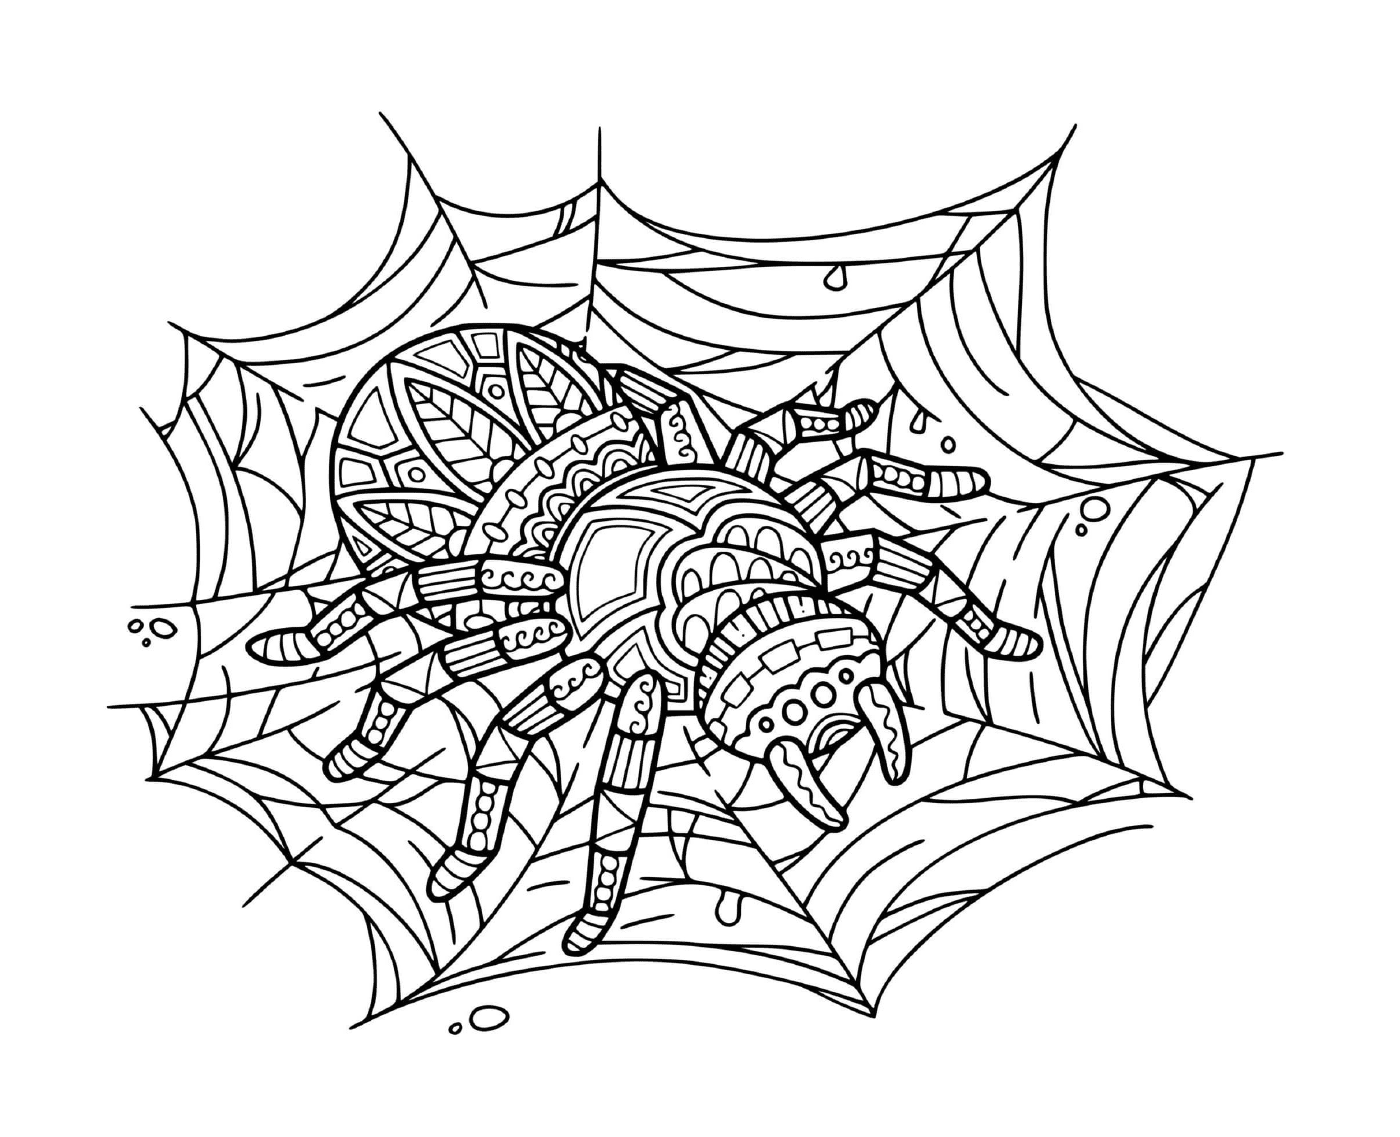  A spider sitting on a mandala relaxation web 